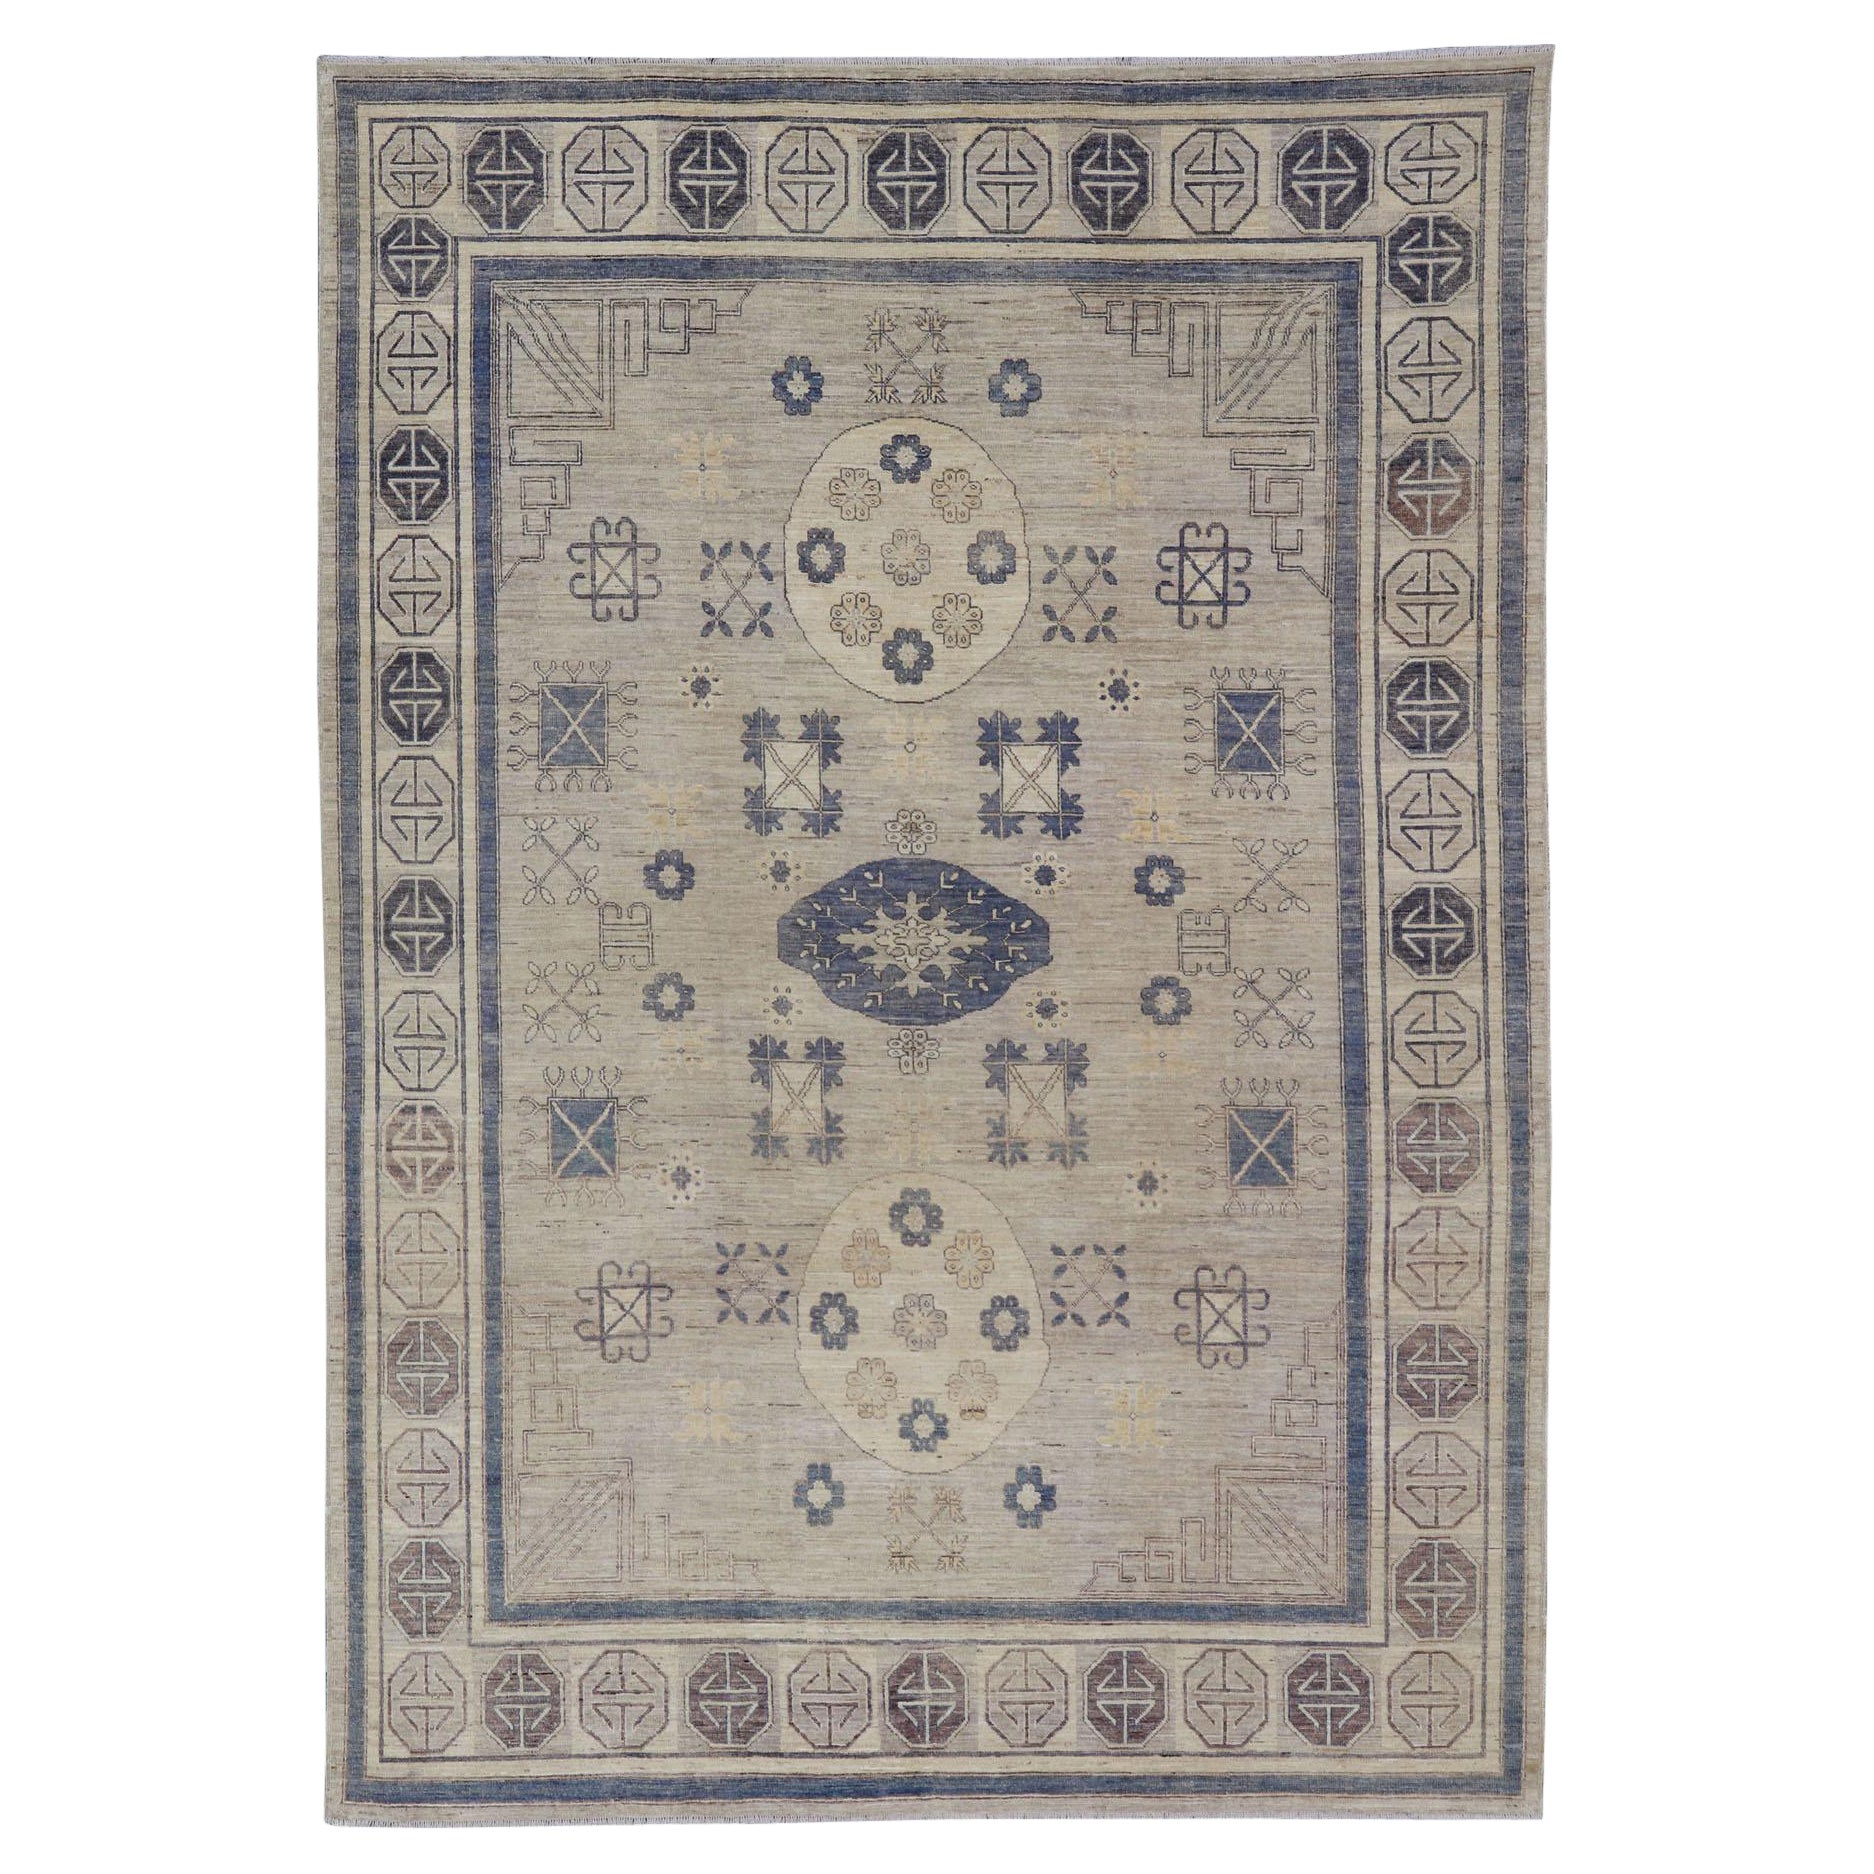 Khotan Design Rug with Geometric Medallions in Royal Blue and Cream